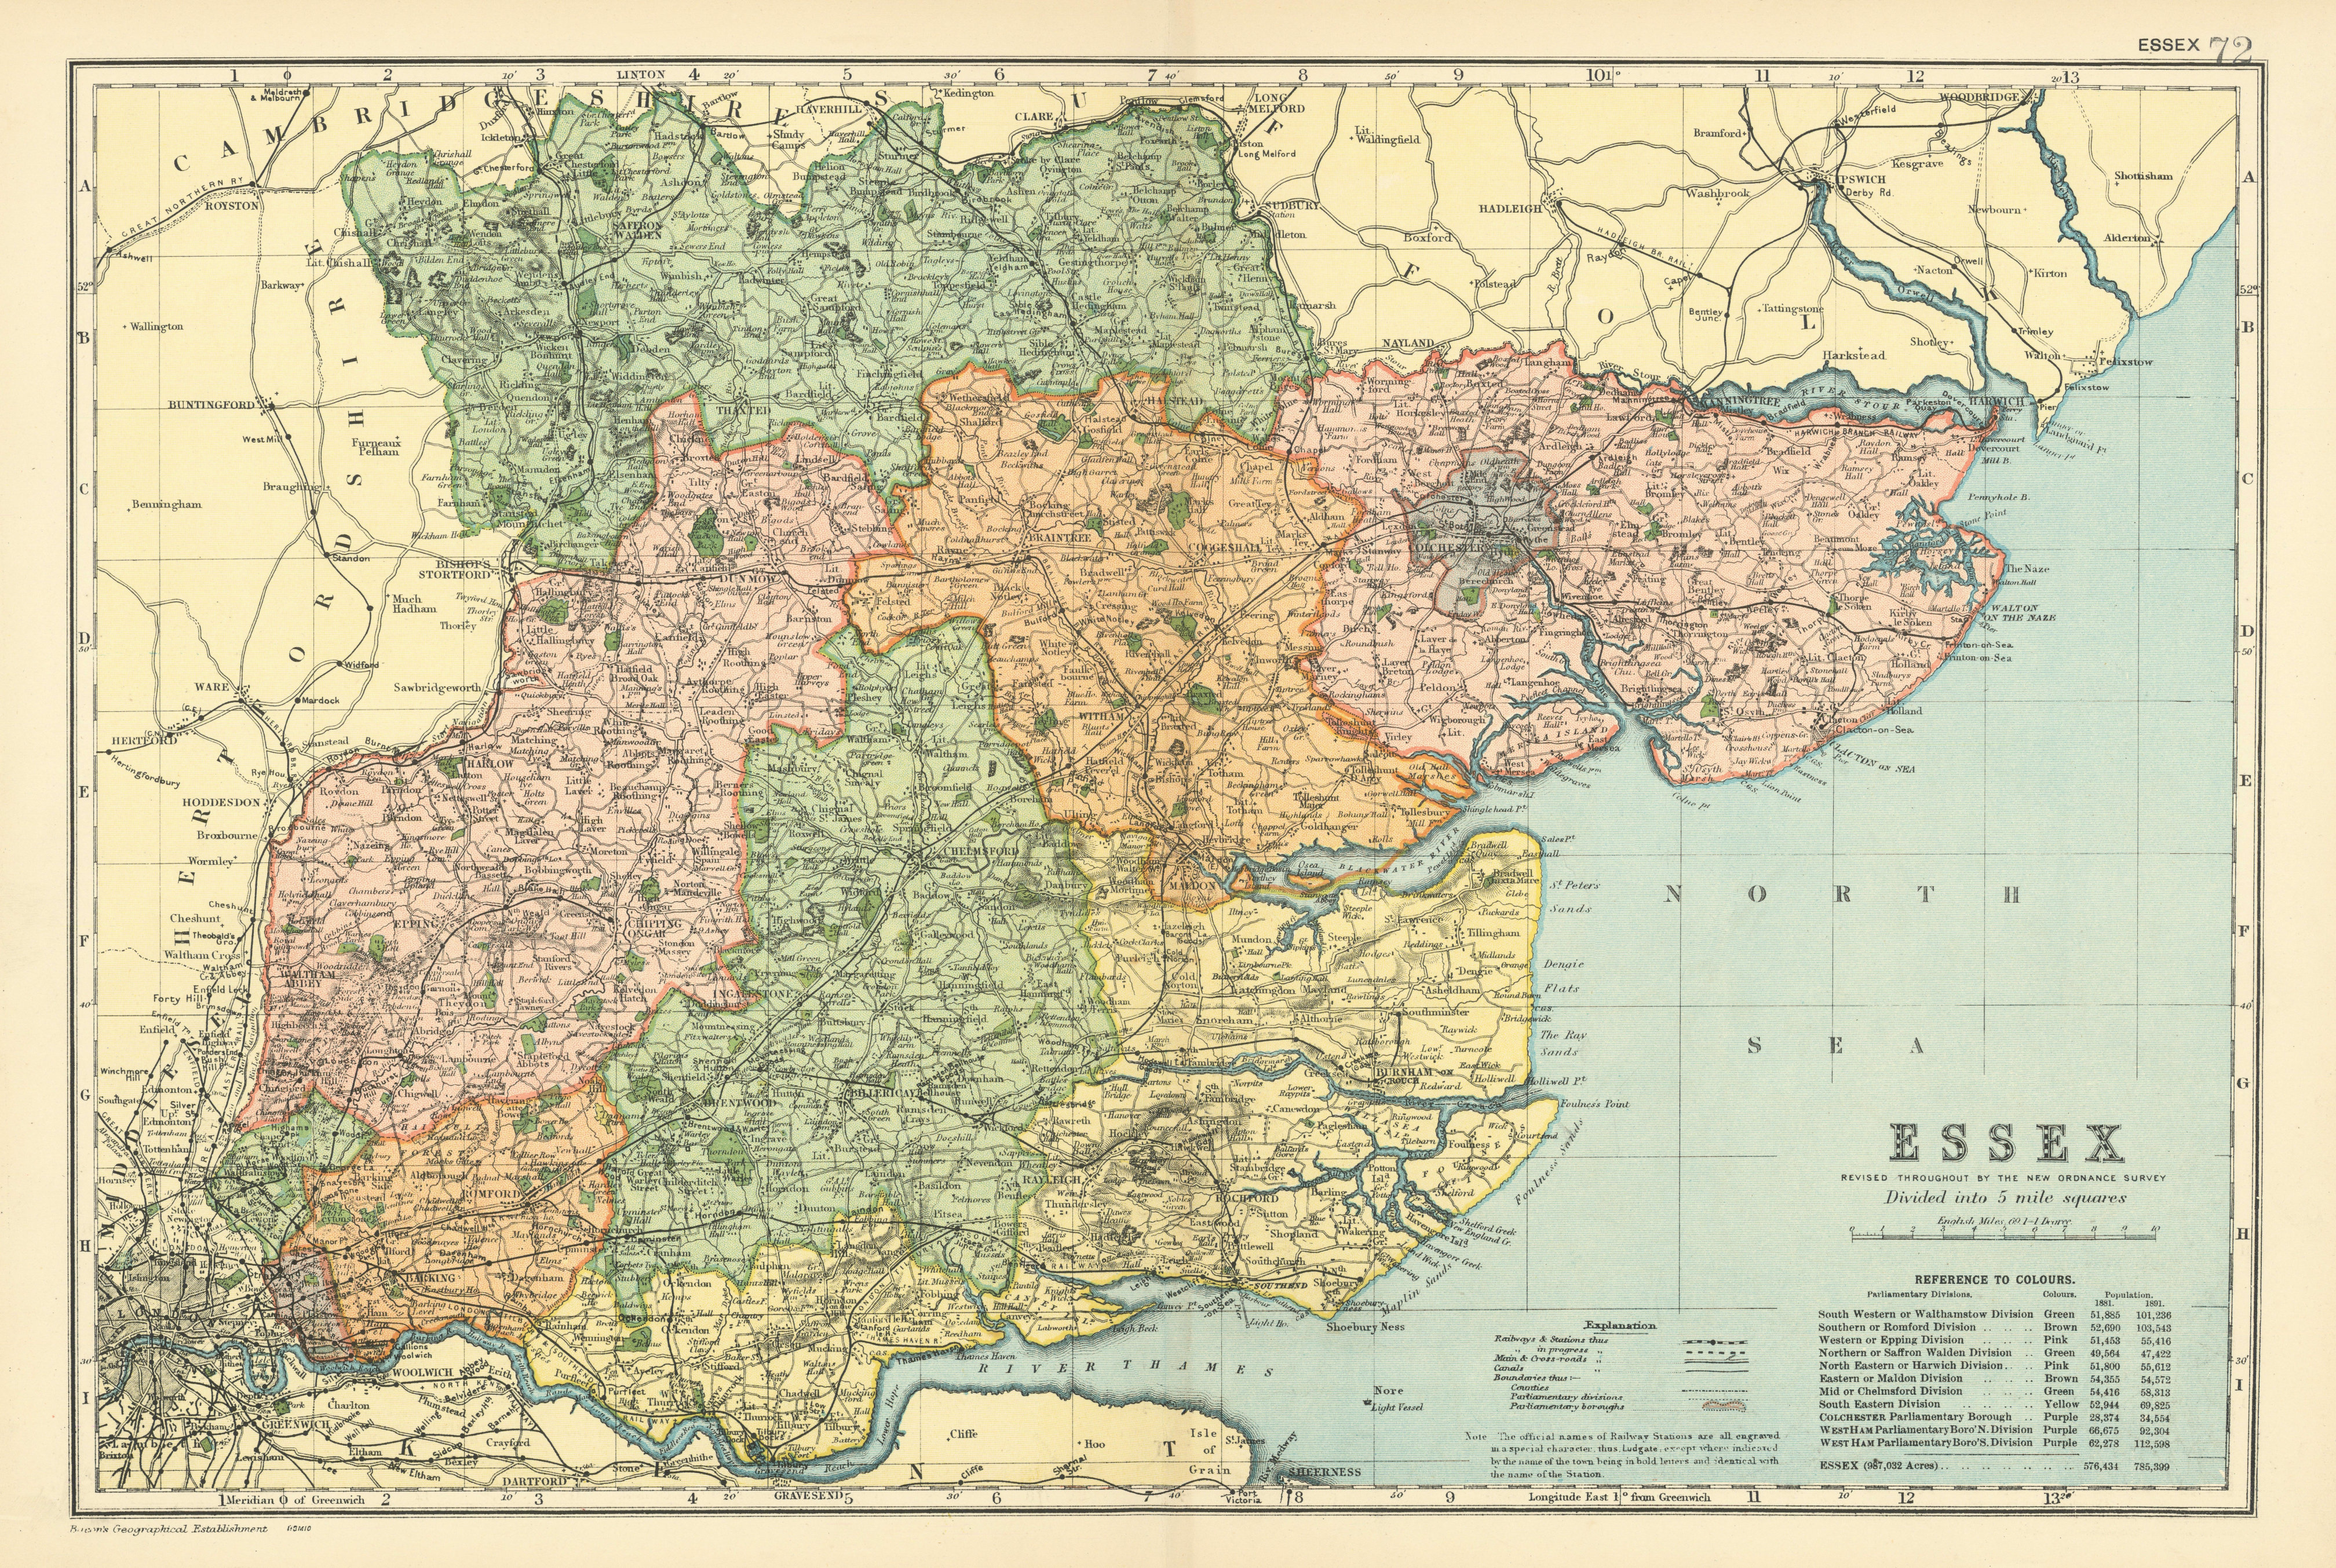 Associate Product ESSEX county map. Parliamentary constituencies divisions. Railways. BACON 1900